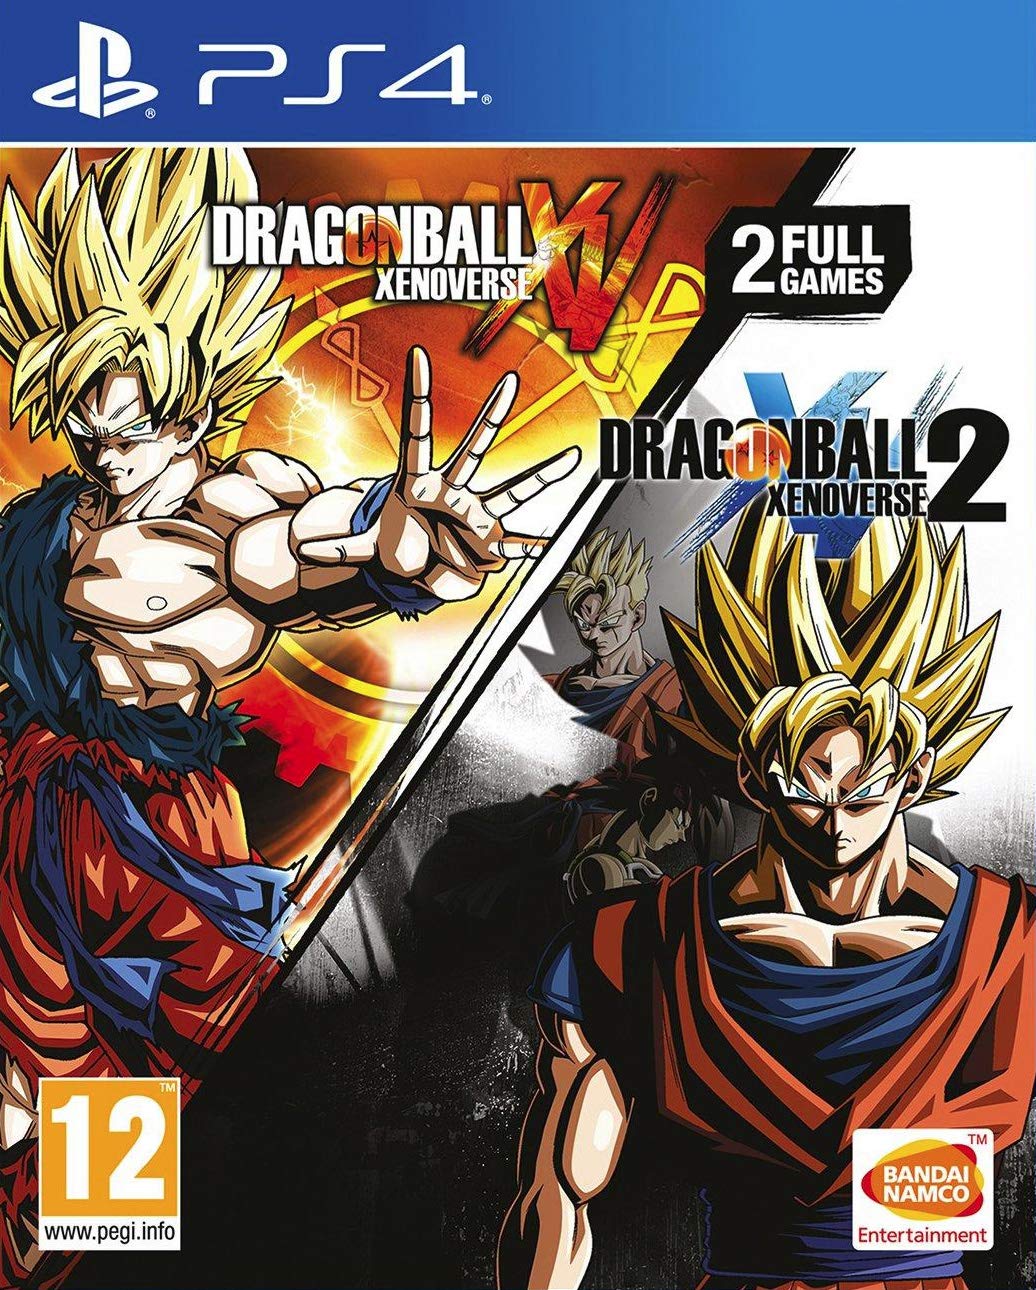 Pack Dragonball Xenoverse 1 y 2 solo 29€